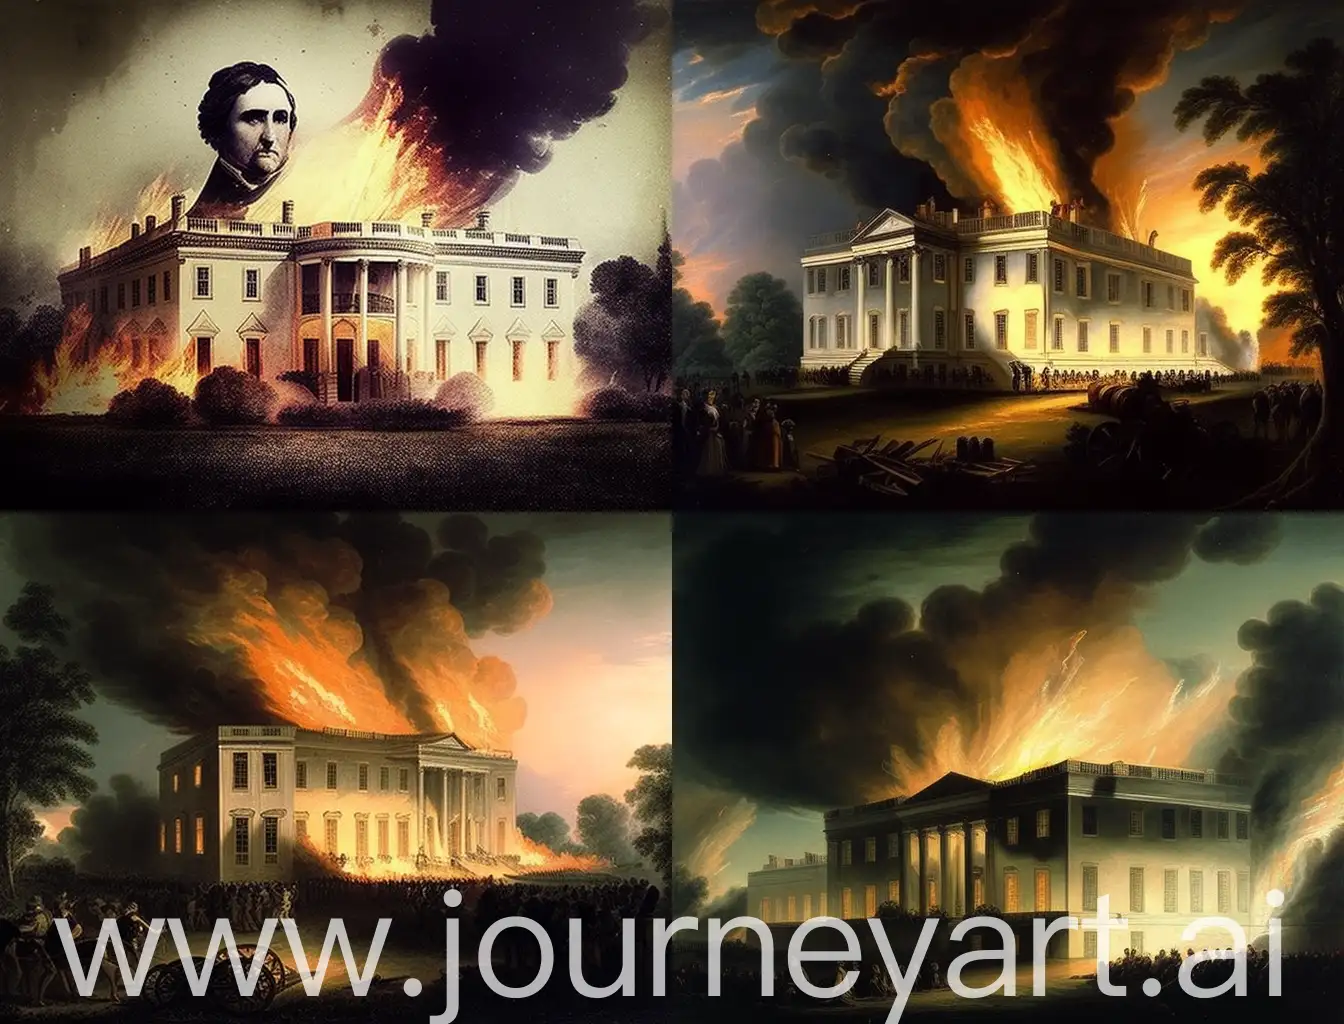 British-Army-Burning-White-House-During-the-War-of-1812